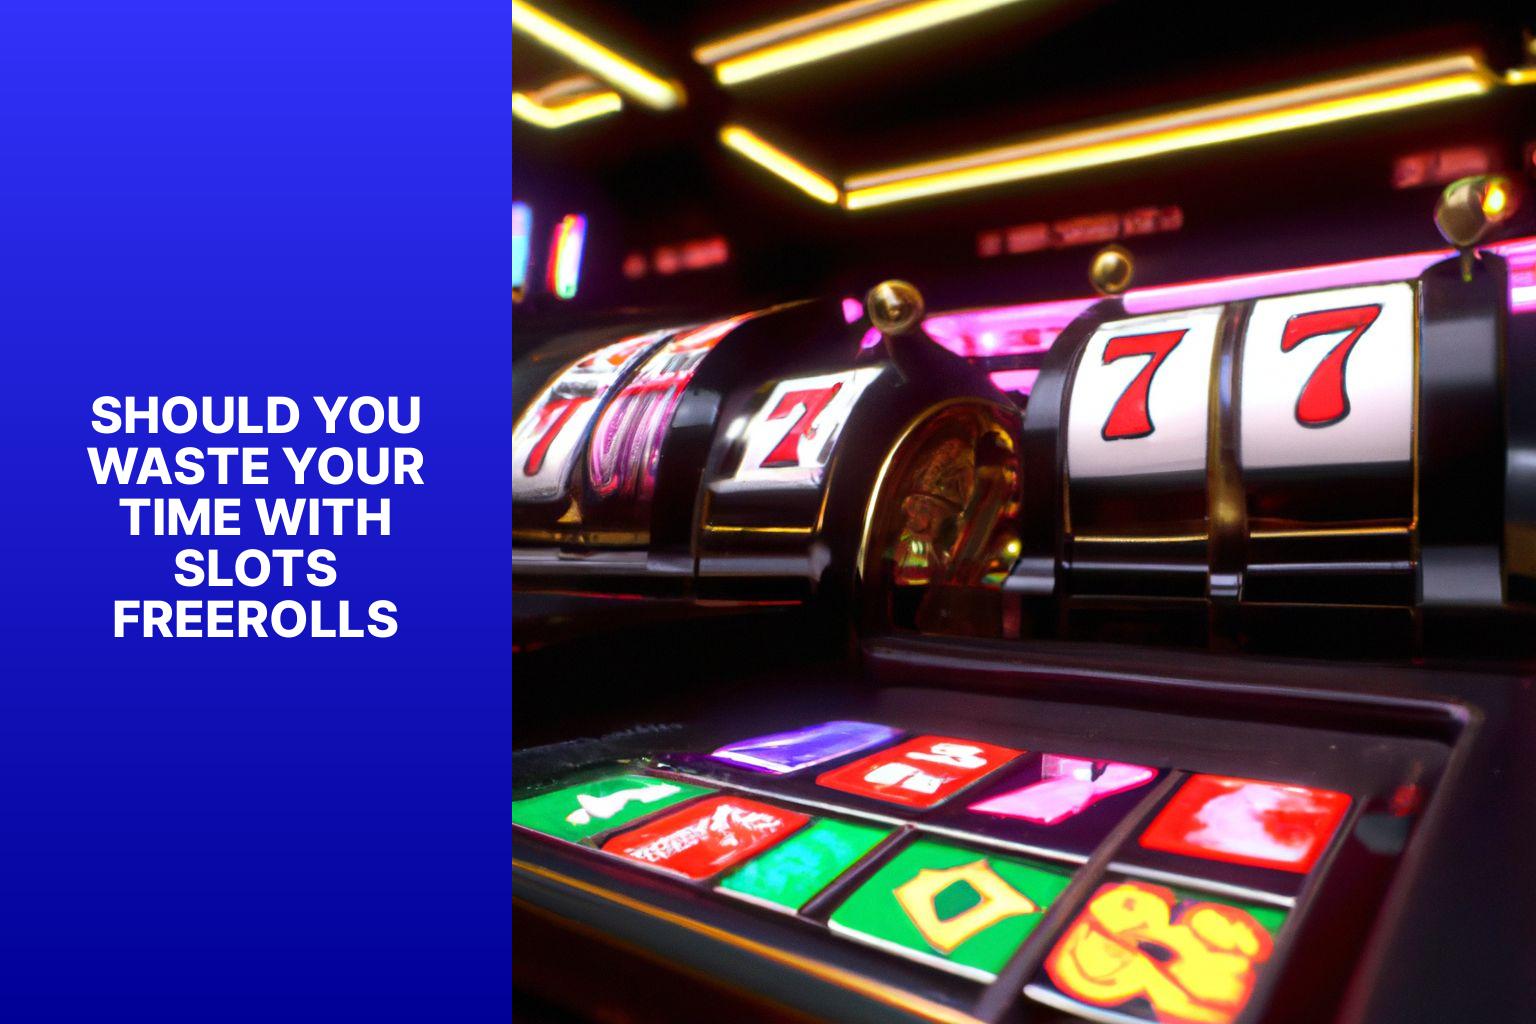 Should You Waste Your Time with Slots Freerolls